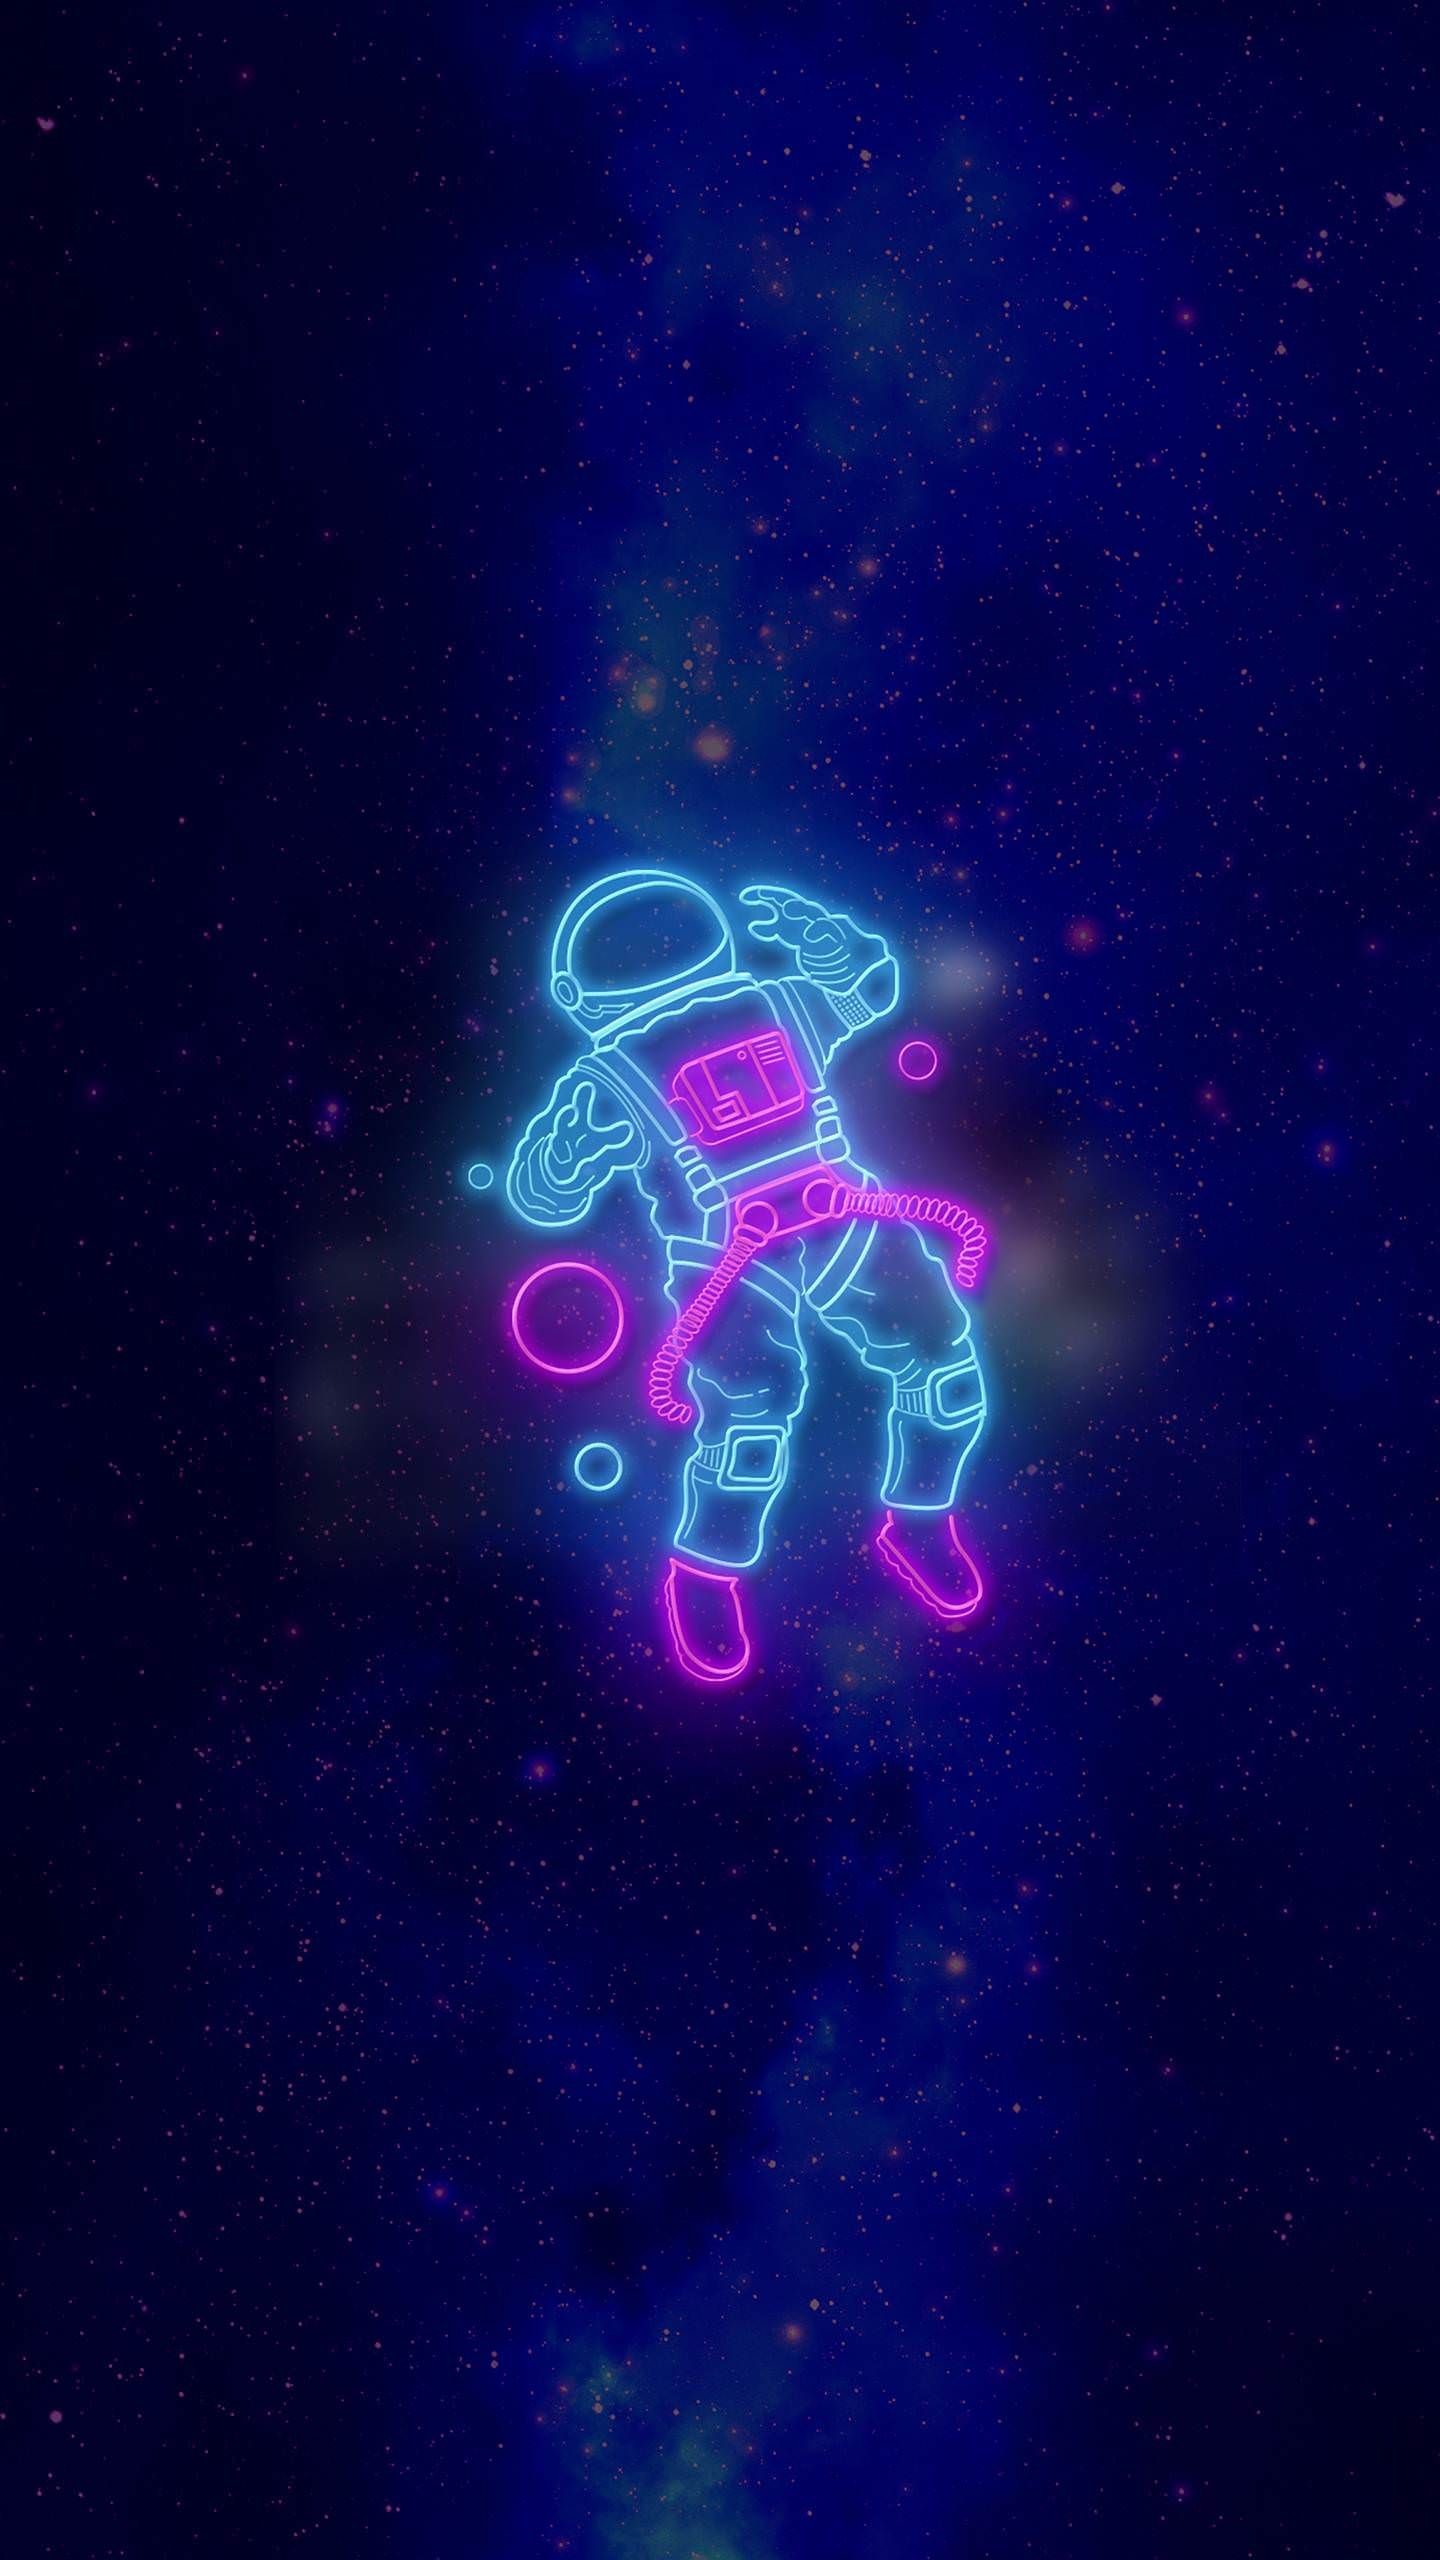 1440x2560 Neon Astronaut Download at: http://www.myfavwallpaper.com/2018